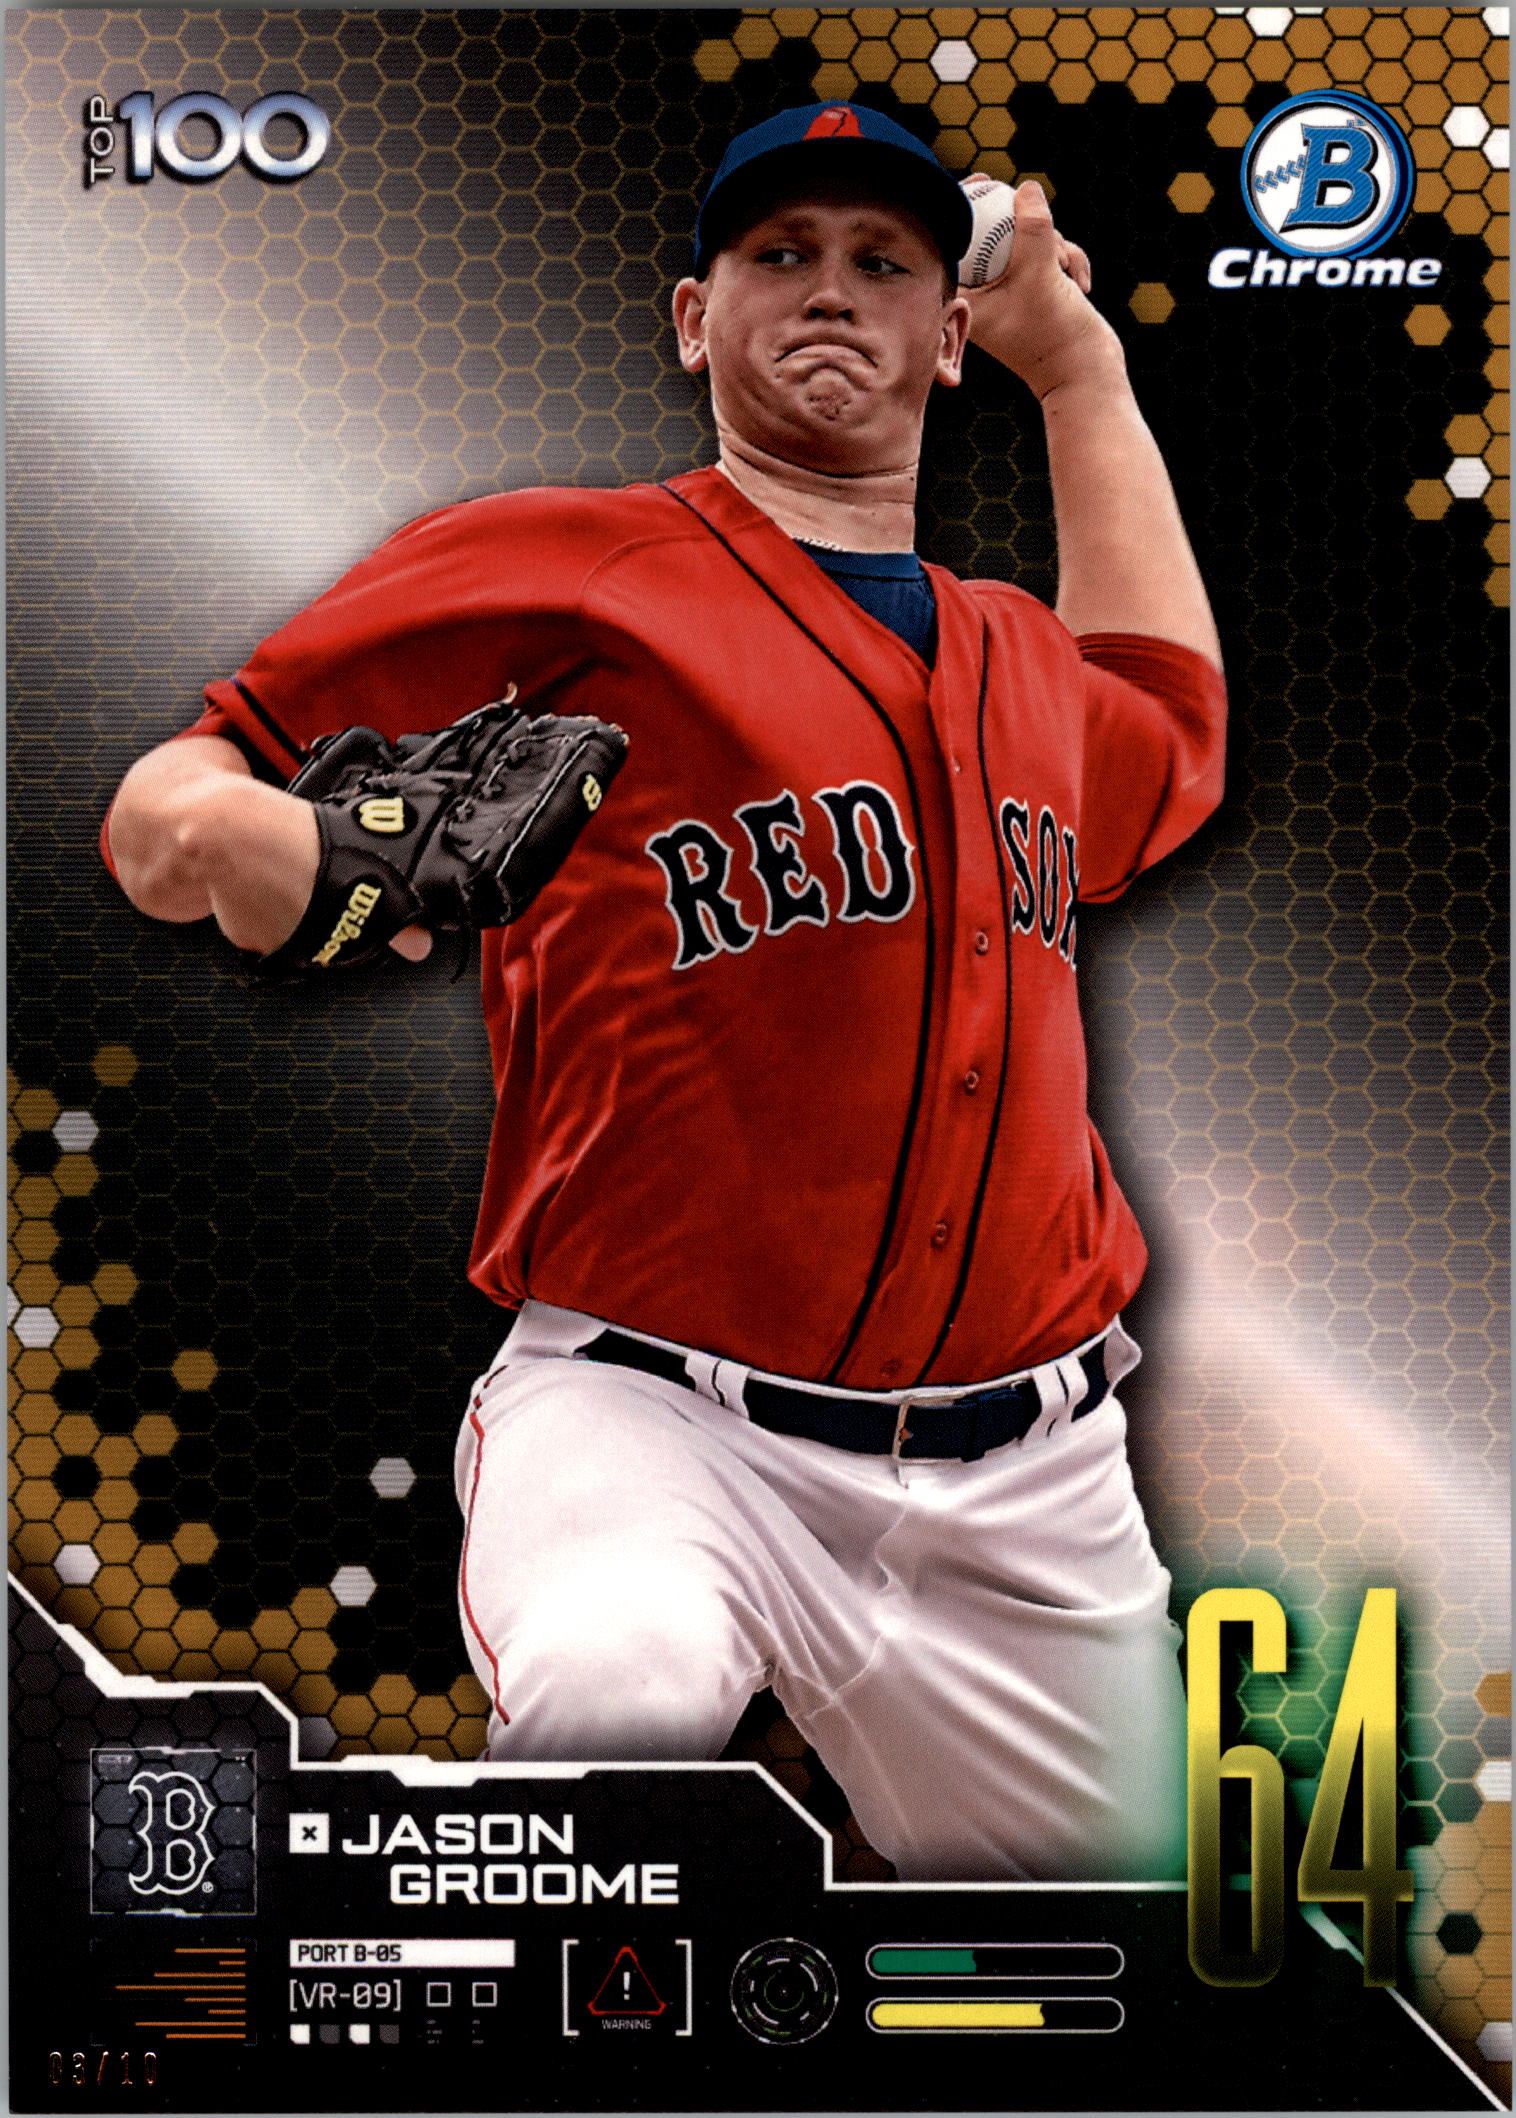  Jay Groome player image